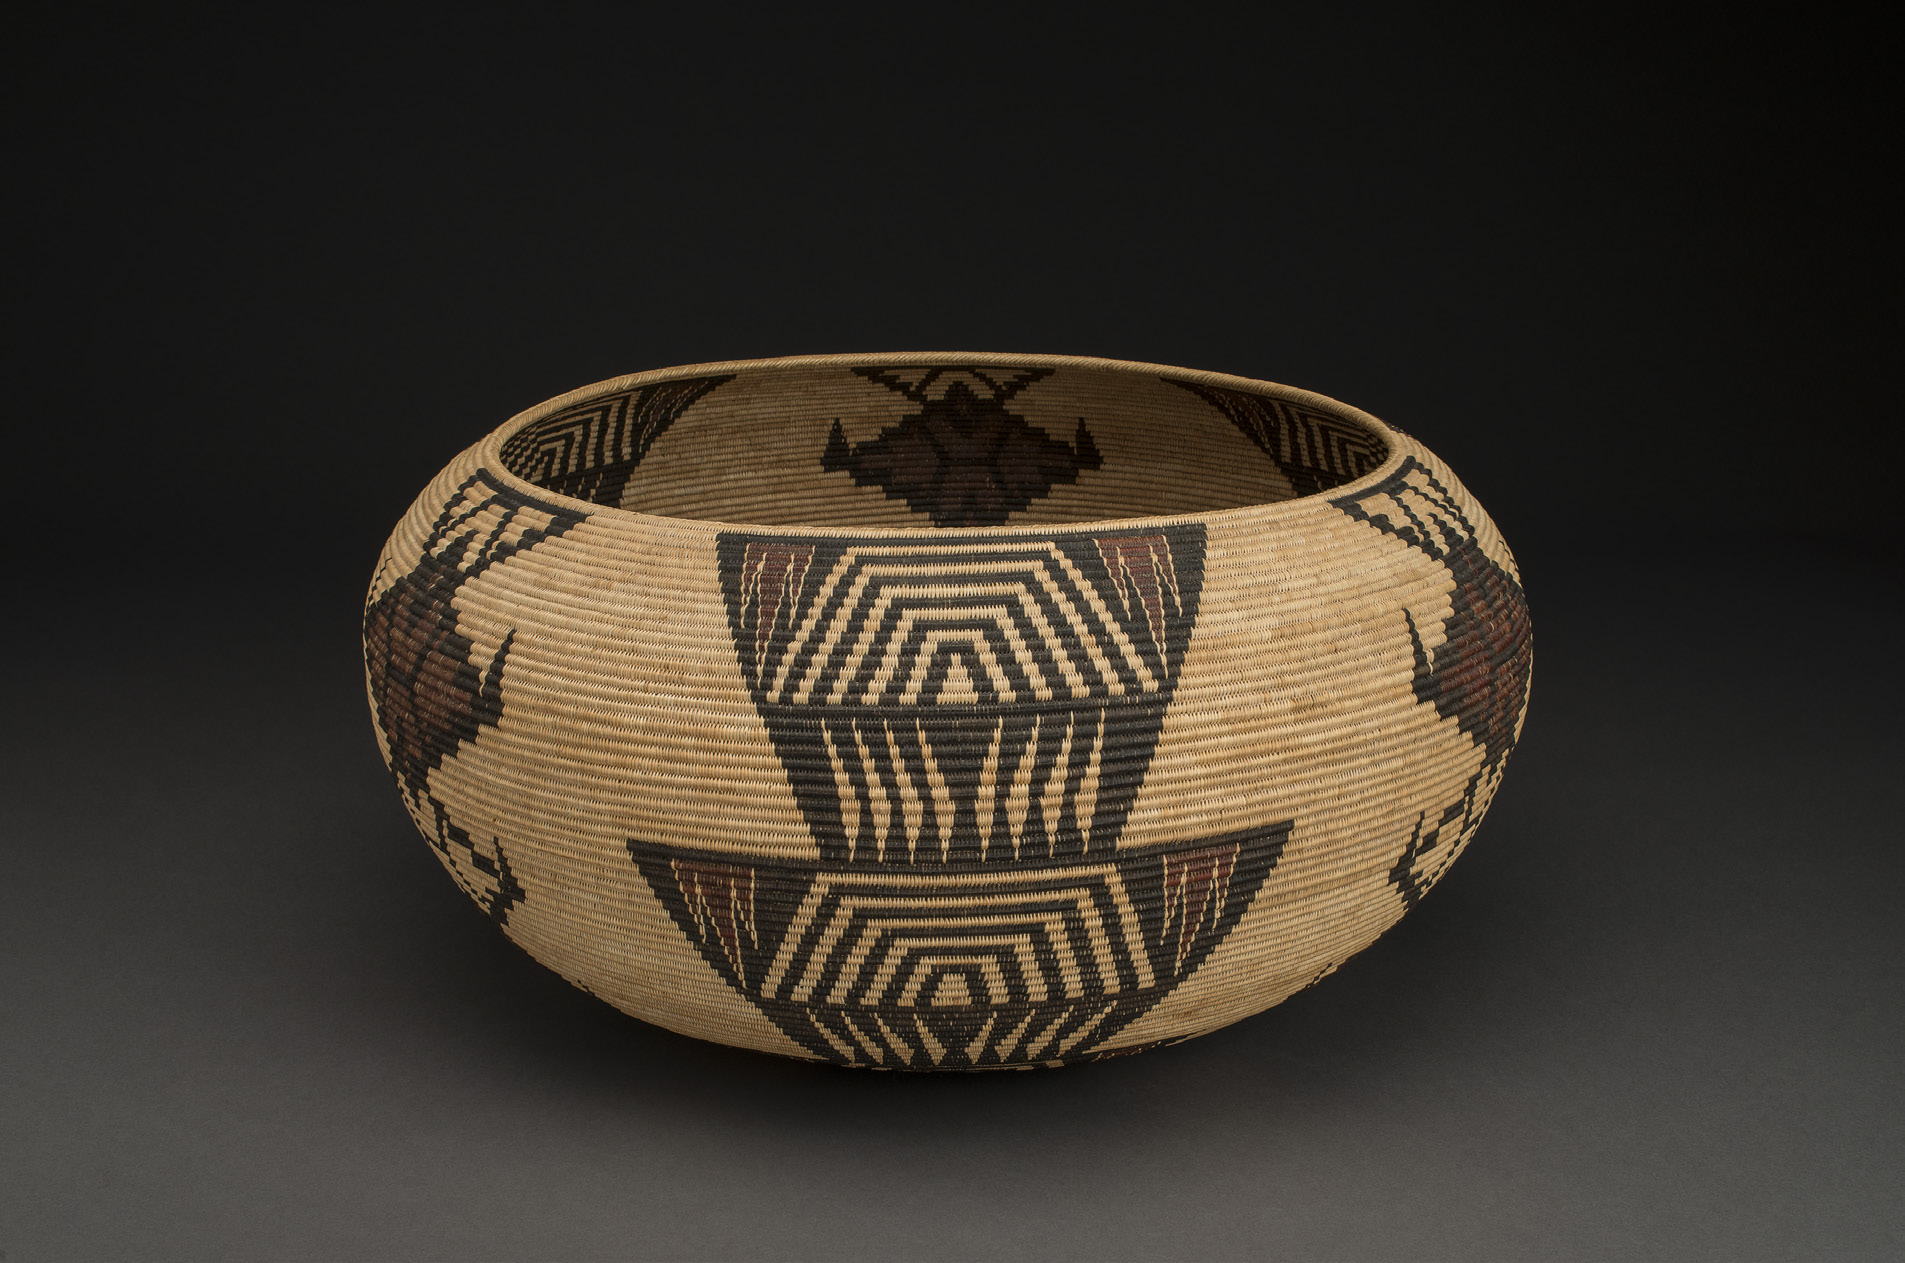 Tina Charlie Mono Lake Paiute, 1869-1962 Bowl basket, 1928. 10 x 20 inches Split sedge root, dyed bracken fern root, split winter redbud shoots, willow shoots Collection of Malee and Wayne Thompson Photo Credit: Craig Smith, Heard Museum